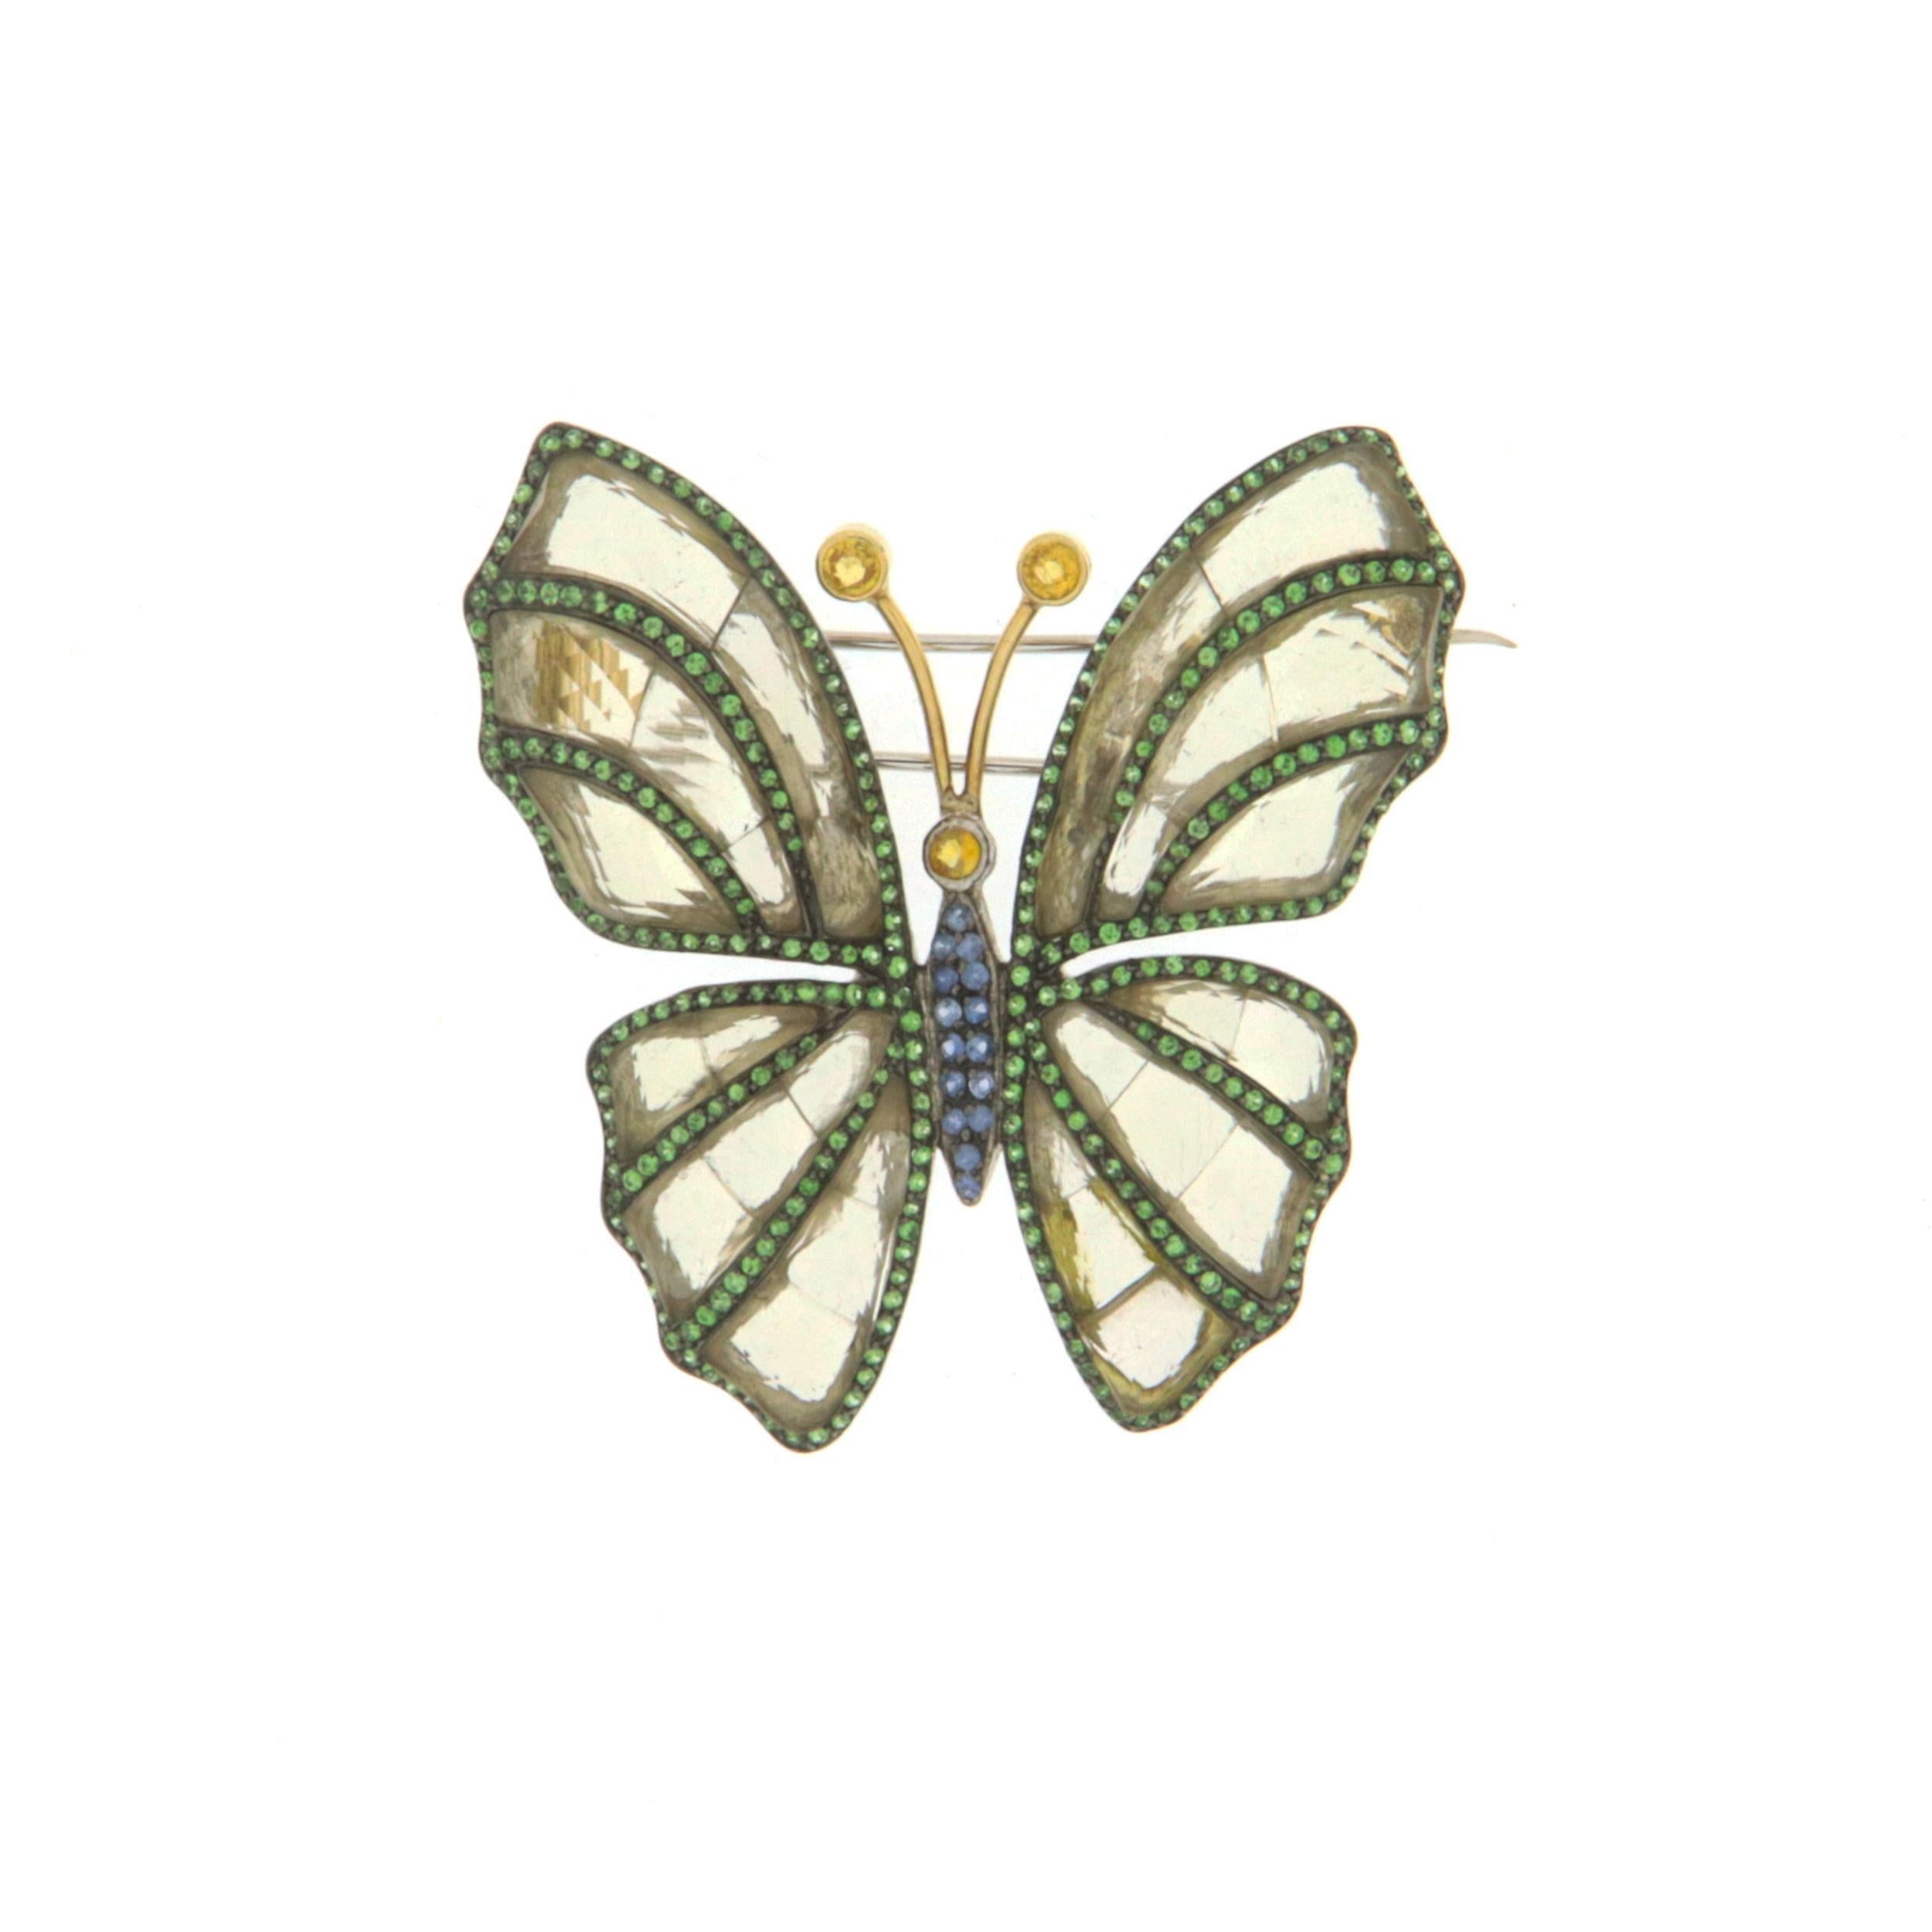 Butterfly 18 karat yellow gold and 925 thousandths silver brooch. Butterfly Handmade by craftsmen assembled with crystal rock,yellow and blue sapphires and tsavorite

Butterfly total Weight 20.80 grams